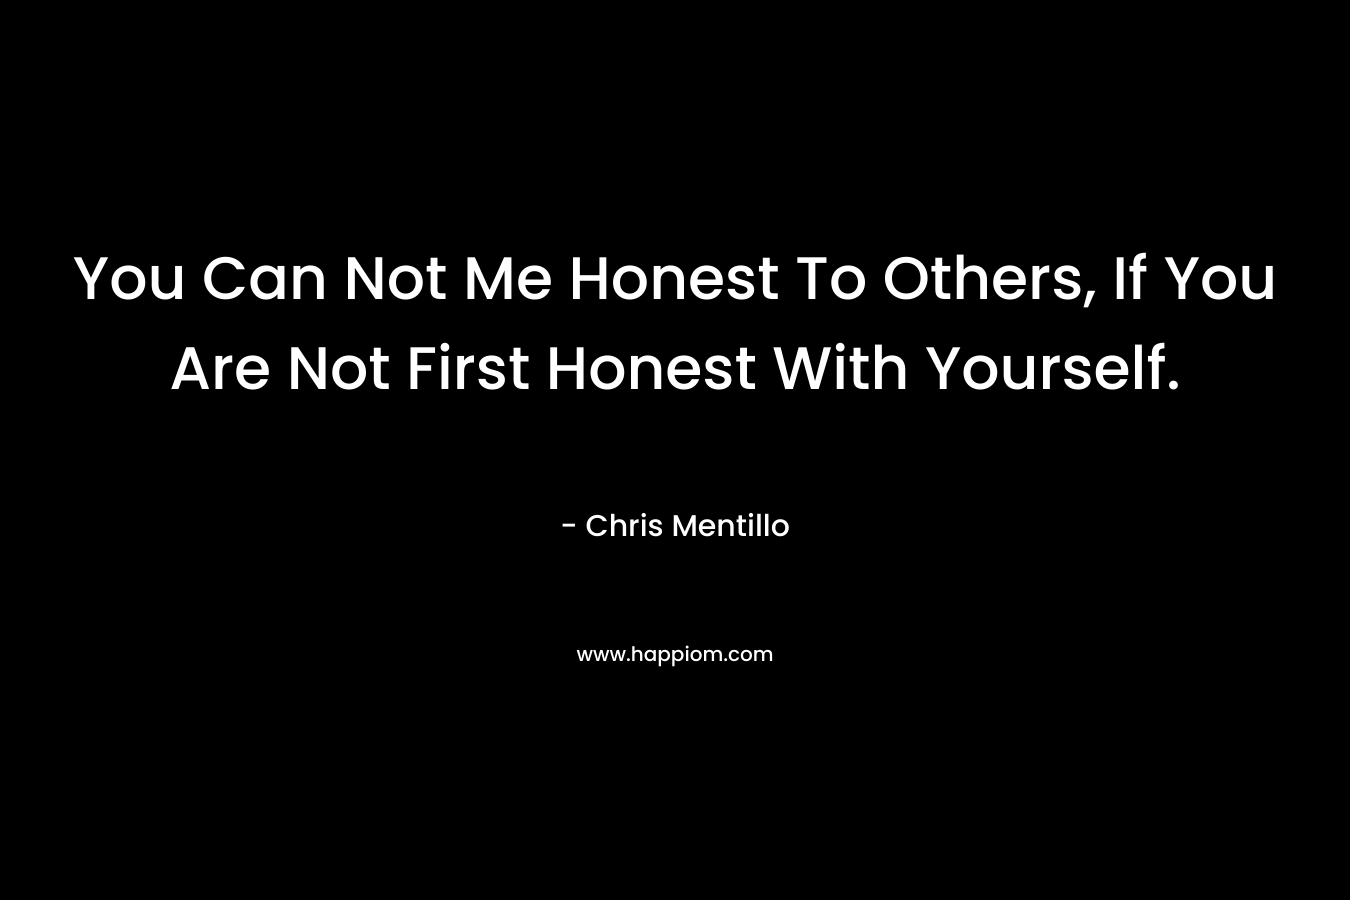 You Can Not Me Honest To Others, If You Are Not First Honest With Yourself.